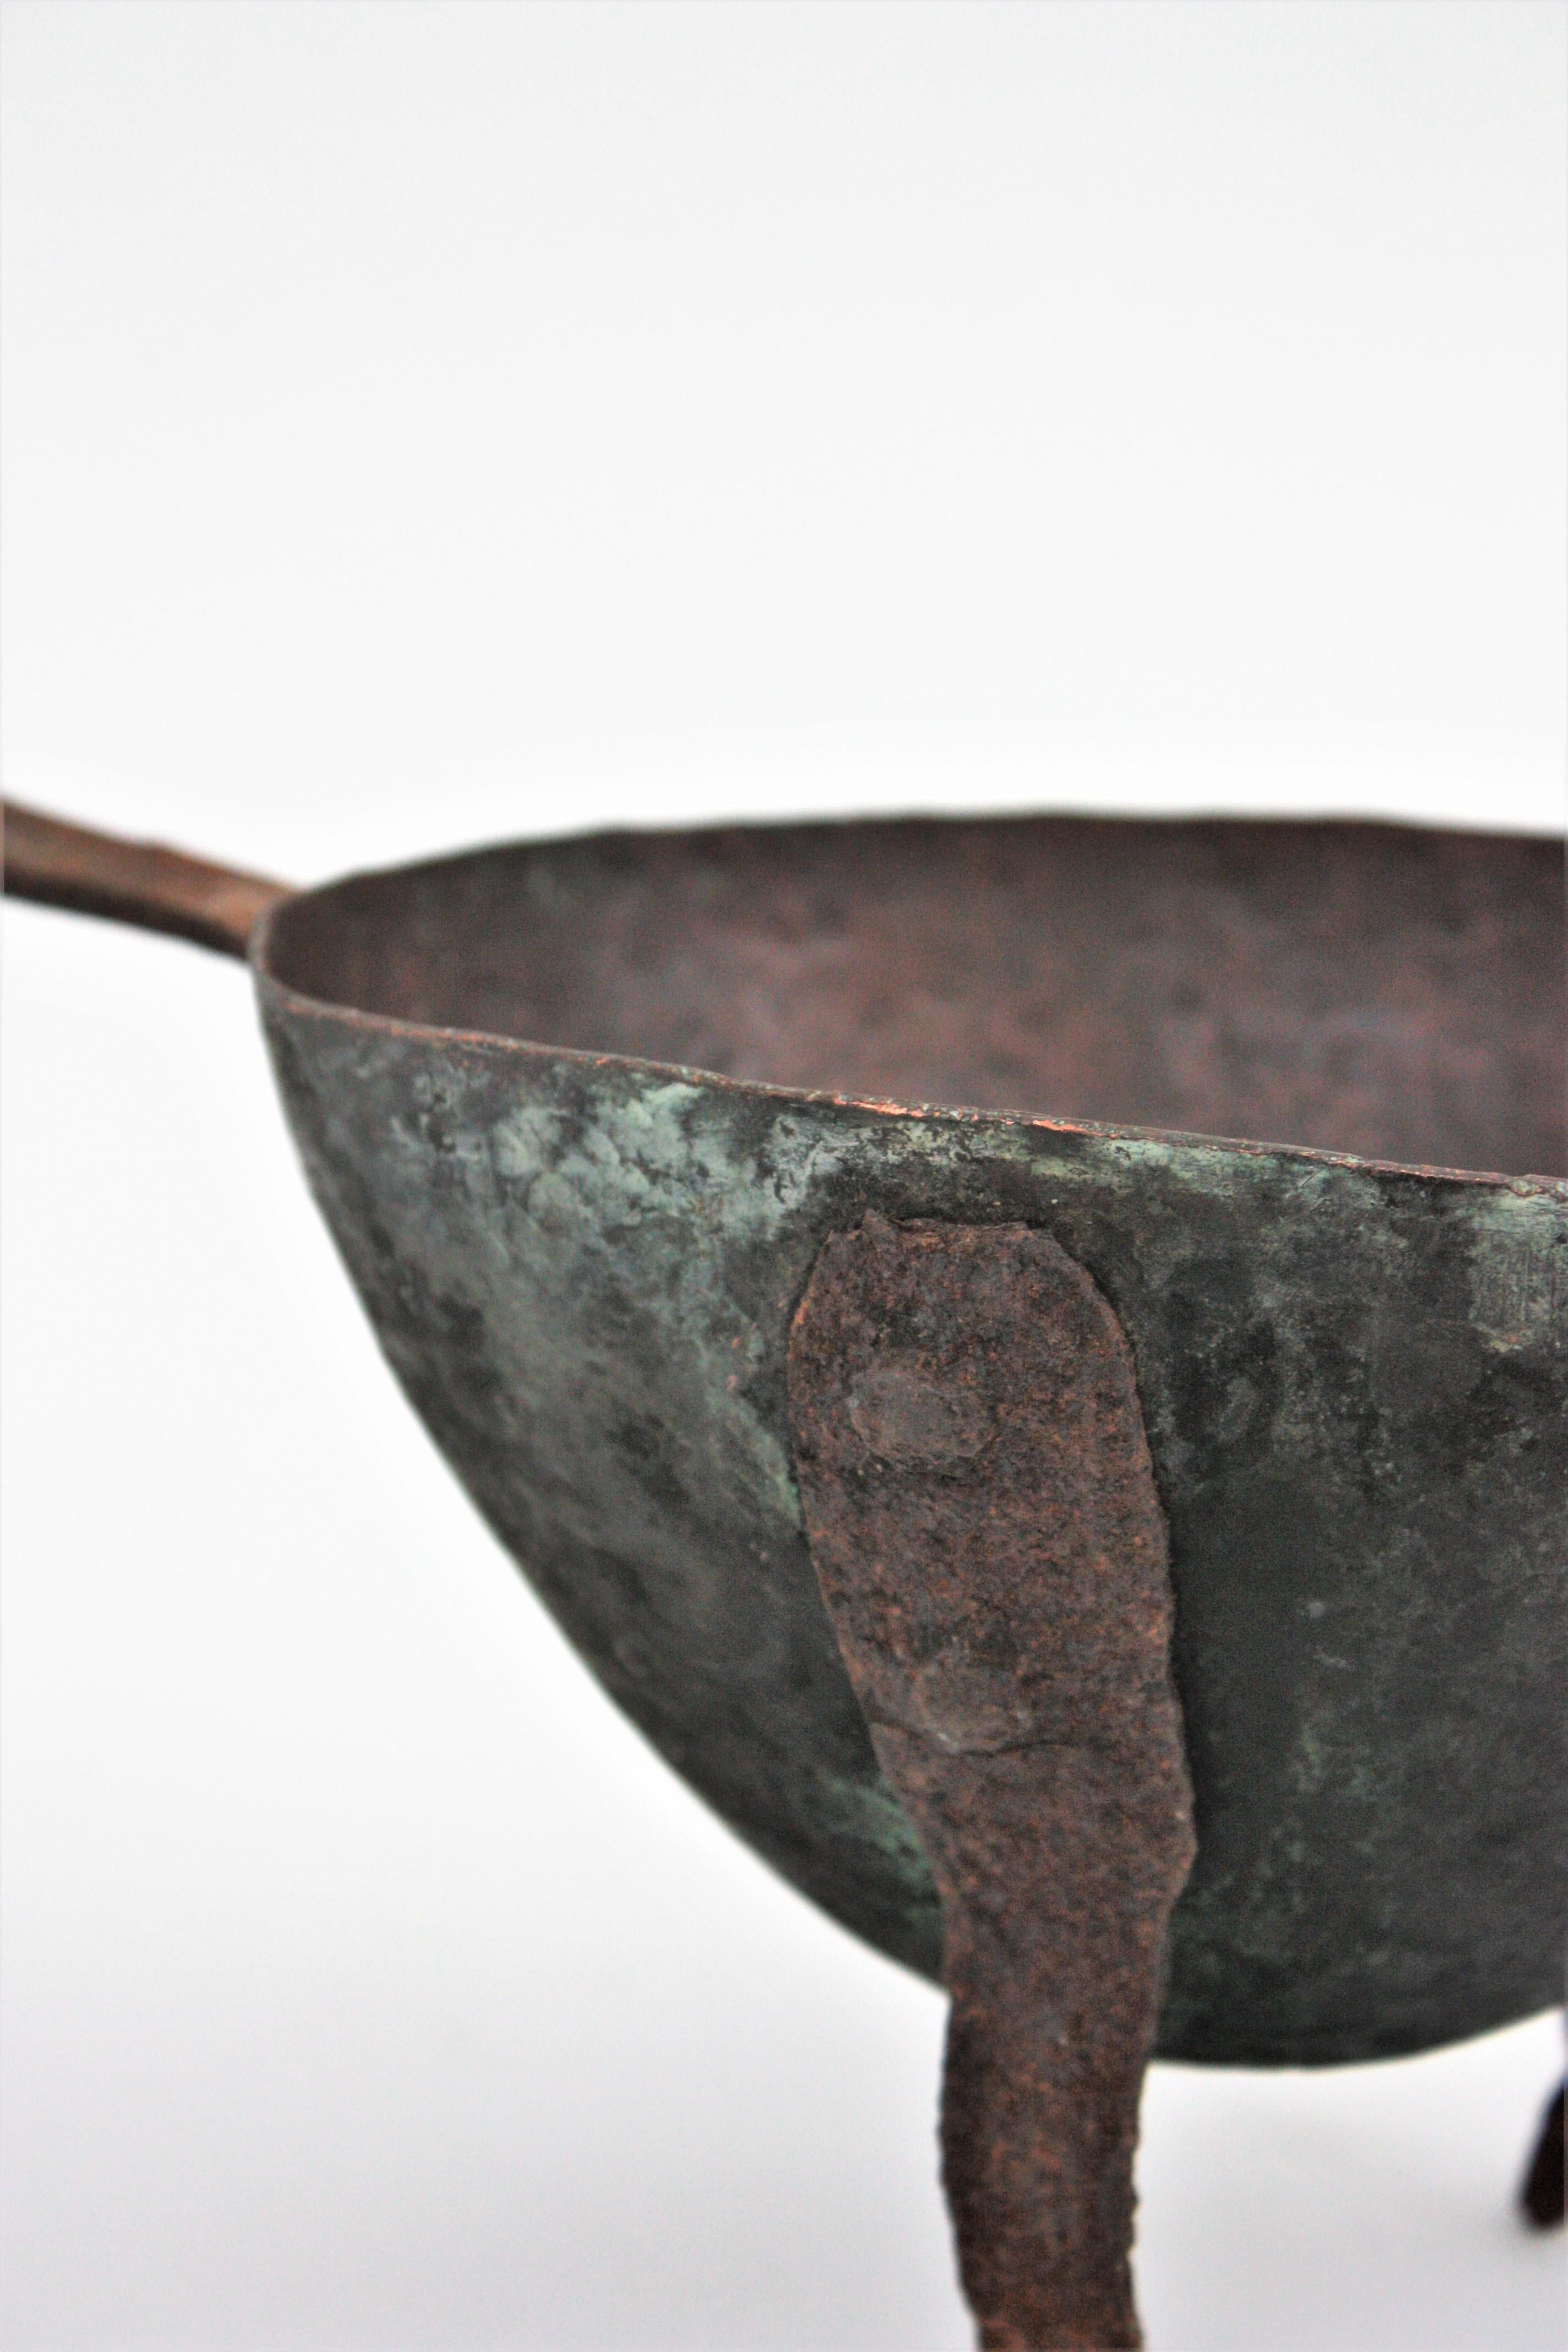 20th Century Spanish Foundry Smelting Tool as Centerpiece, Copper and Iron For Sale